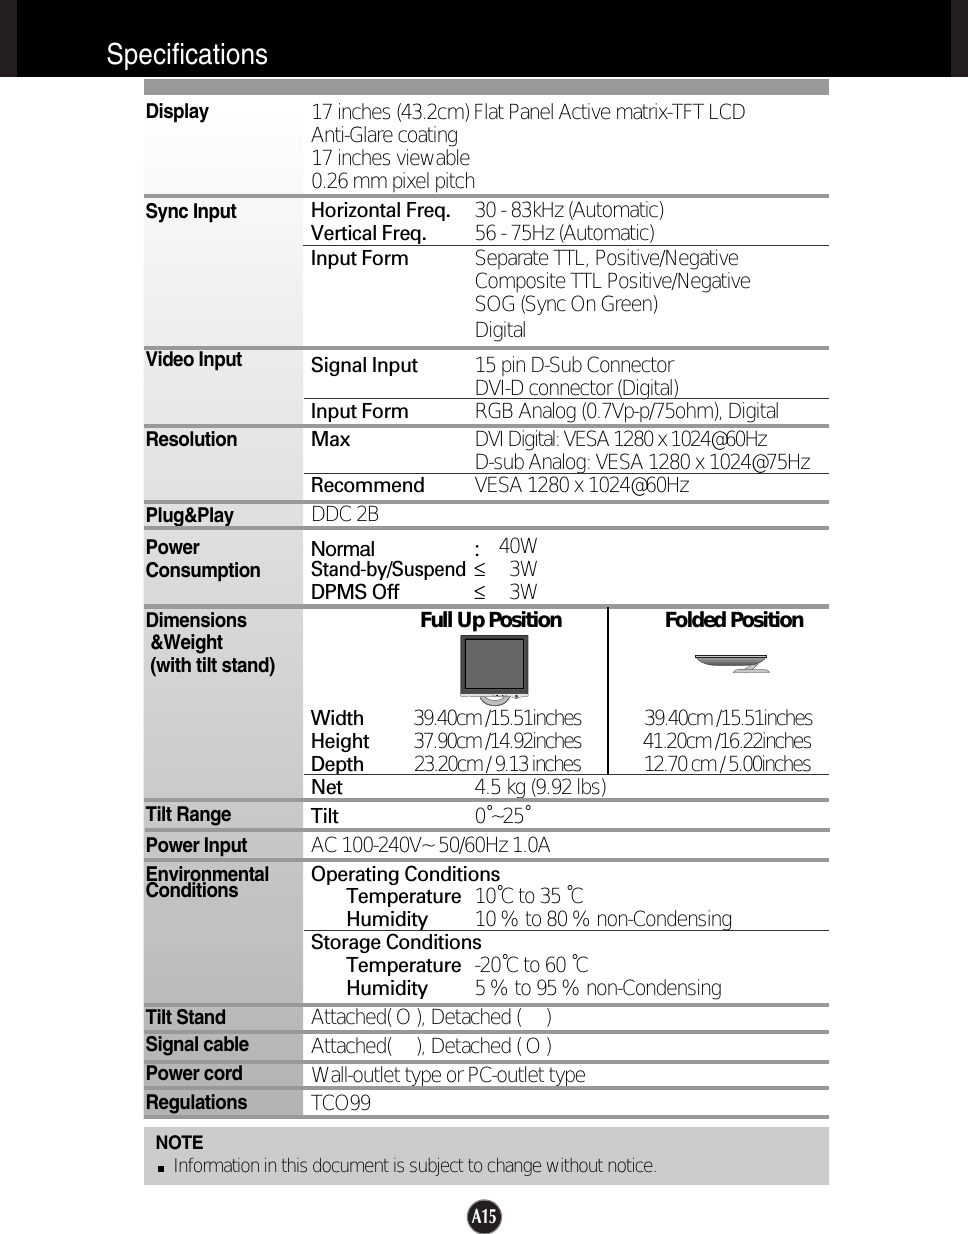 A15SpecificationsNOTEInformation in this document is subject to change without notice.17 inches (43.2cm) Flat Panel Active matrix-TFT LCD Anti-Glare coating17 inches viewable0.26 mm pixel pitchHorizontal Freq. 30 - 83kHz (Automatic)Vertical Freq. 56 - 75Hz (Automatic)Input Form Separate TTL, Positive/NegativeComposite TTL Positive/NegativeSOG (Sync On Green) DigitalSignal Input 15 pin D-Sub ConnectorDVI-D connector (Digital)Input Form RGB Analog (0.7Vp-p/75ohm), DigitalMax DVI Digital: VESA 1280 x 1024@60HzD-sub Analog: VESA 1280 x 1024@75Hz Recommend VESA 1280 x 1024@60HzDDC 2BNormal :40WStand-by/Suspend ≤ 3WDPMS Off ≤ 3W Full Up Position                     Folded PositionWidth          39.40cm /15.51inches               39.40cm /15.51inchesHeight         37.90cm /14.92inches 41.20cm /16.22inchesDepth          23.20cm / 9.13 inches               12.70 cm / 5.00inchesNet 4.5 kg (9.92 lbs)Tilt 0˚~25˚AC 100-240V~ 50/60Hz 1.0AOperating ConditionsTemperature 10˚C to 35 ˚CHumidity 10 % to 80 % non-CondensingStorage ConditionsTemperature -20˚C to 60 ˚CHumidity 5 % to 95 % non-CondensingAttached( O ), Detached (     )Attached(     ), Detached ( O )Wall-outlet type or PC-outlet typeTCO99DisplaySync InputVideo InputResolutionPlug&amp;PlayPowerConsumptionDimensions&amp;Weight(with tilt stand)Tilt RangePower InputEnvironmentalConditionsTilt StandSignal cablePower cord Regulations